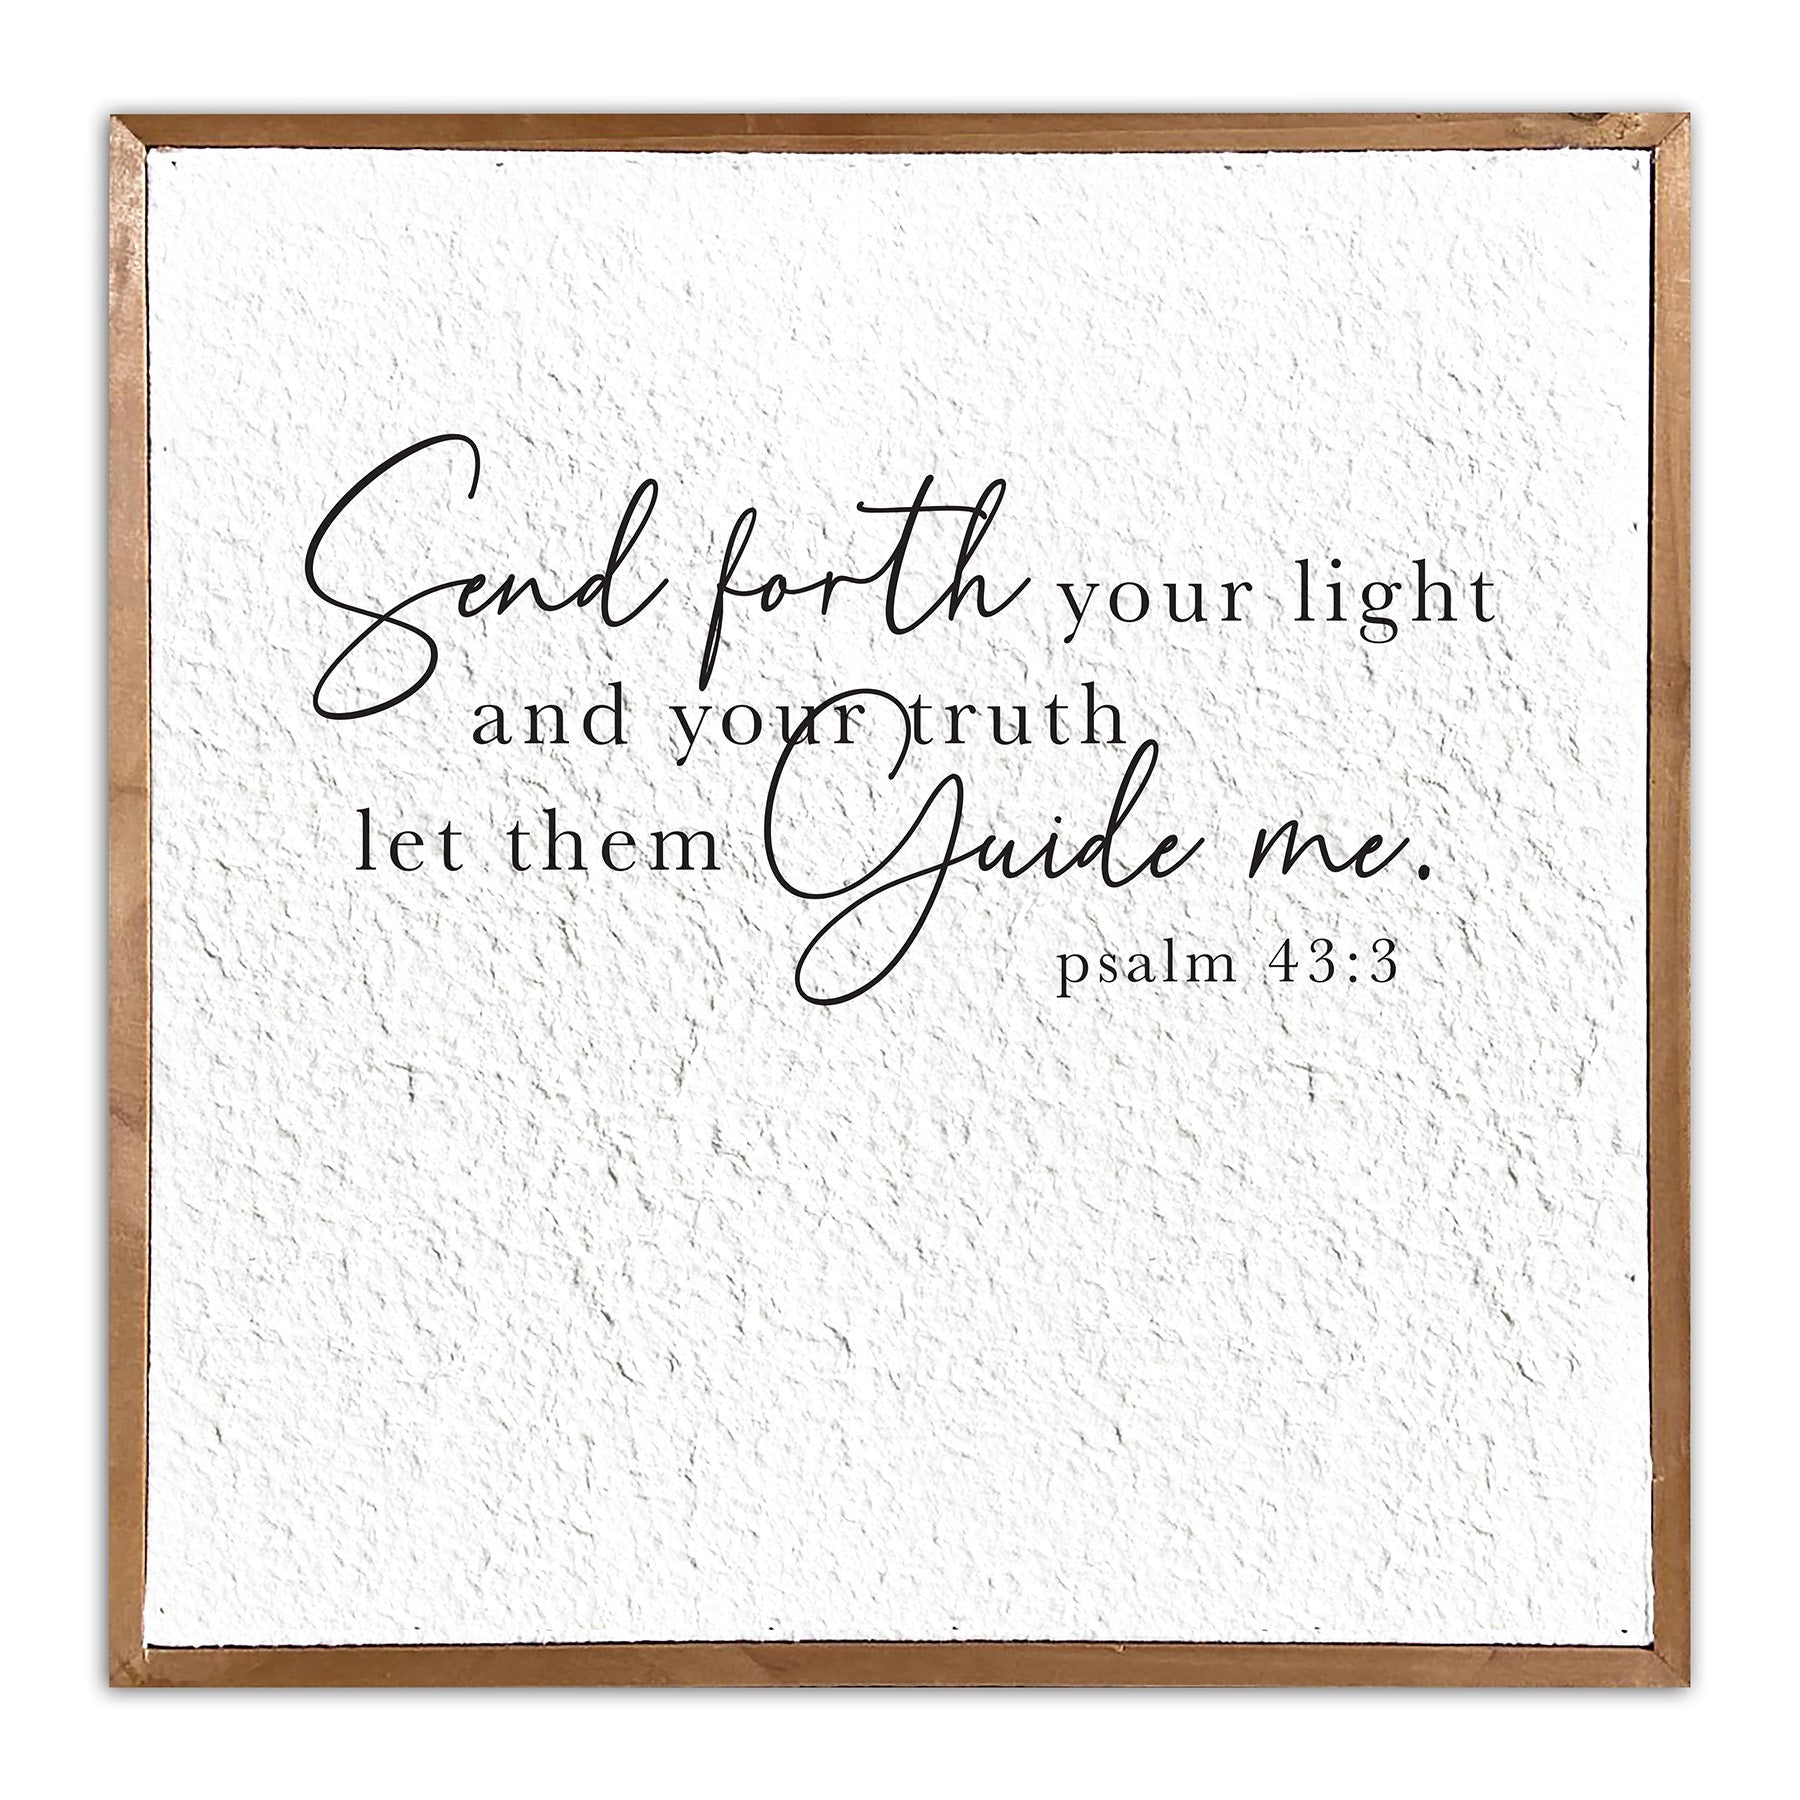 Send forth your life and your truth let them guide me. Psalm 43:3 / 14x14 Pulp Paper Wall Decor